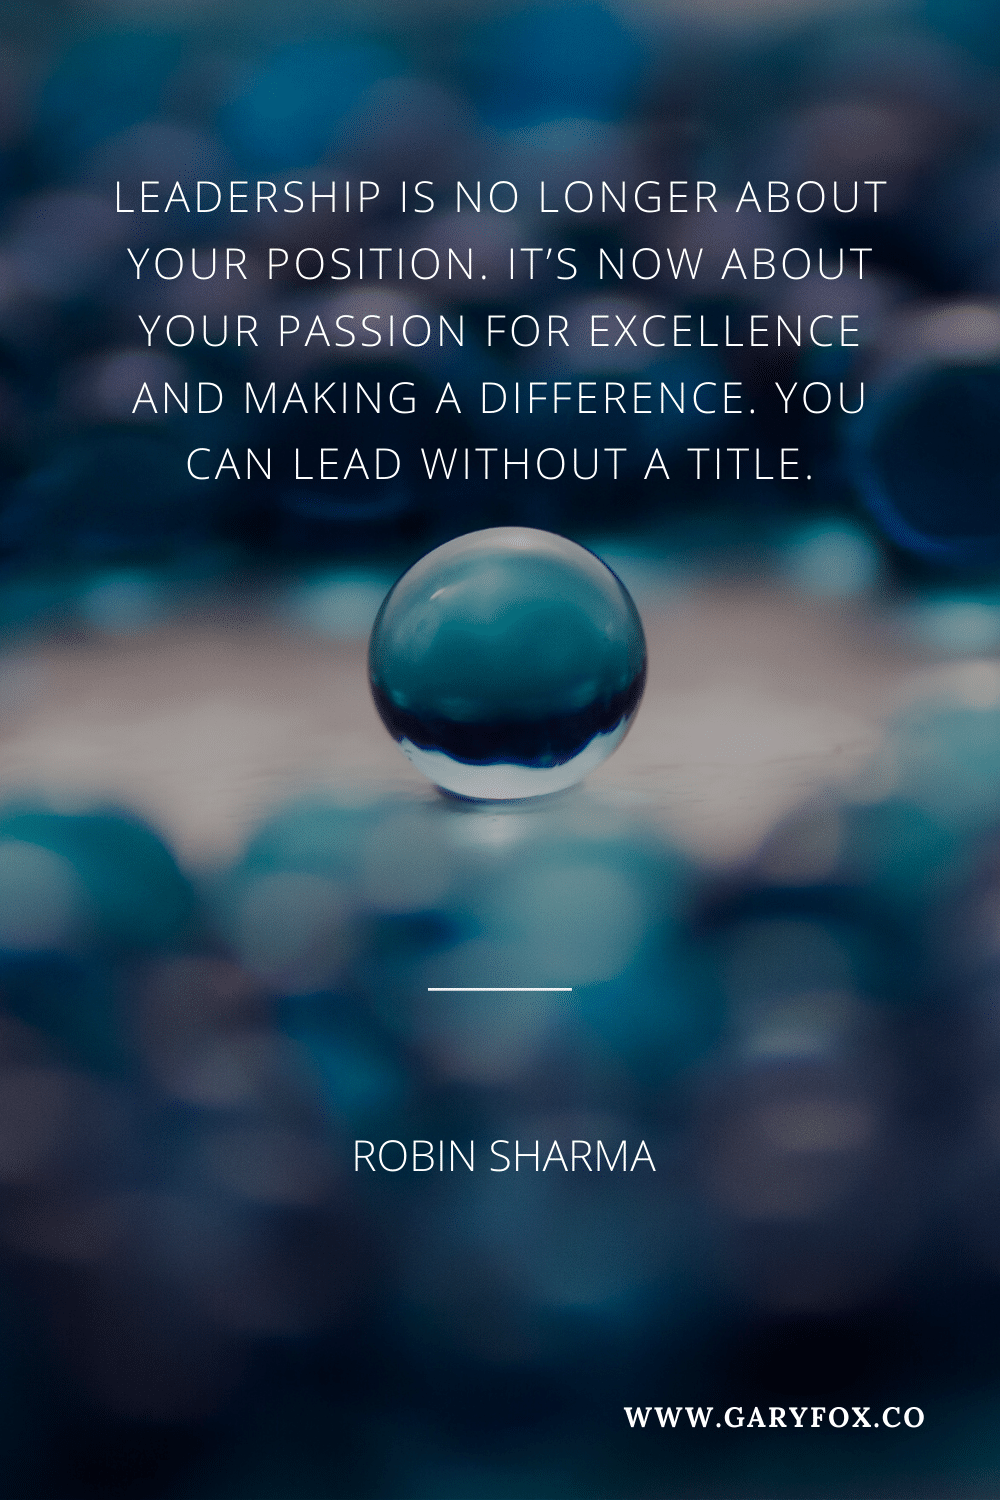 Leadership Is No Longer About Your Position. It’s Now About Your Passion For Excellence And Making A Difference. You Can Lead Without A Title. - Robin Sharma